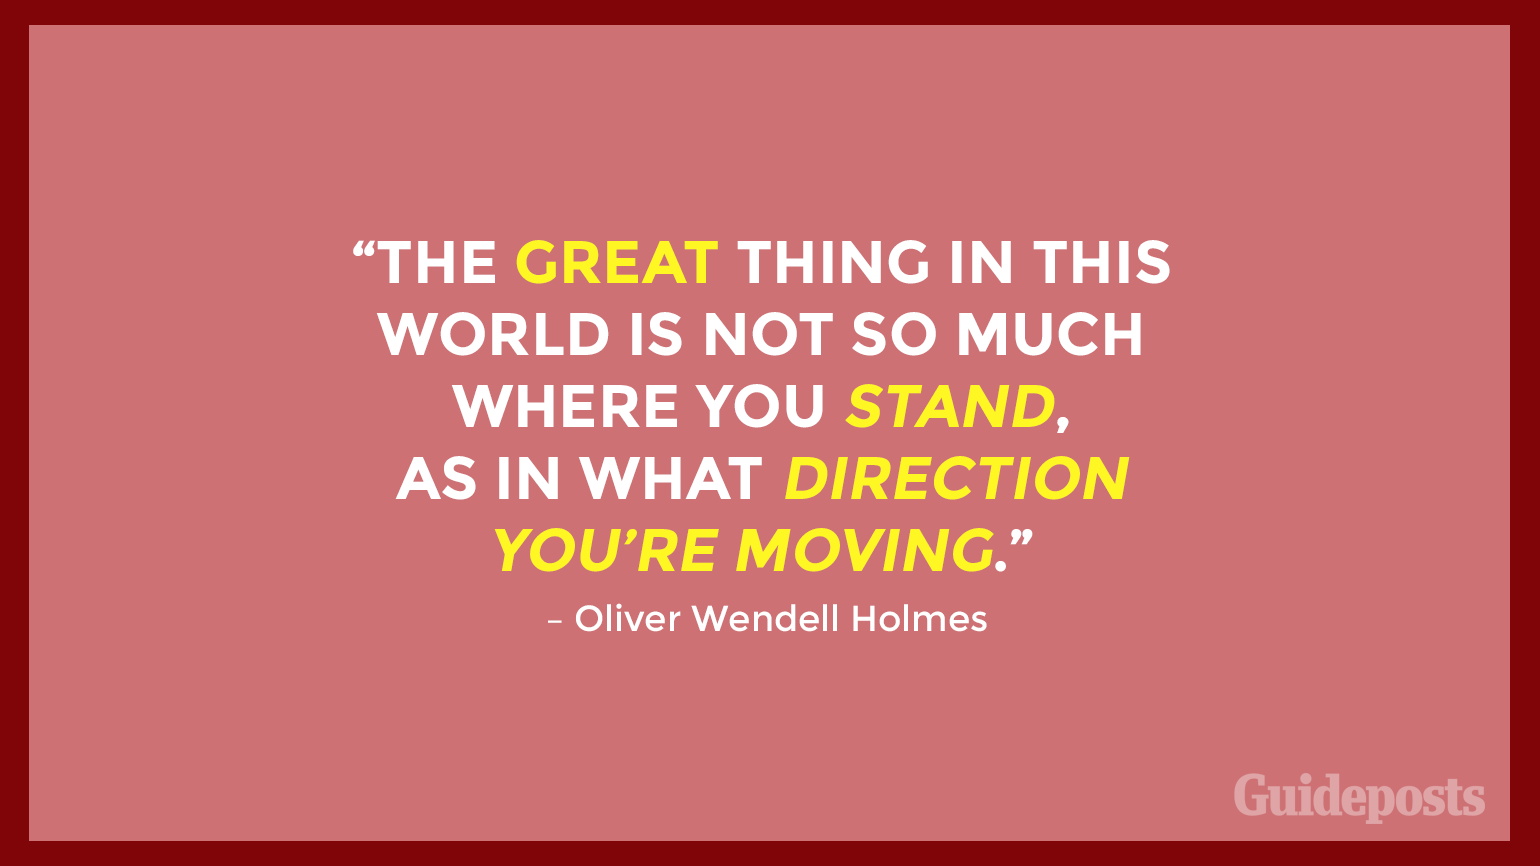 “The great thing in this world is not so much where you stand, as in what direction you’re moving.” – Oliver Wendell Holmes